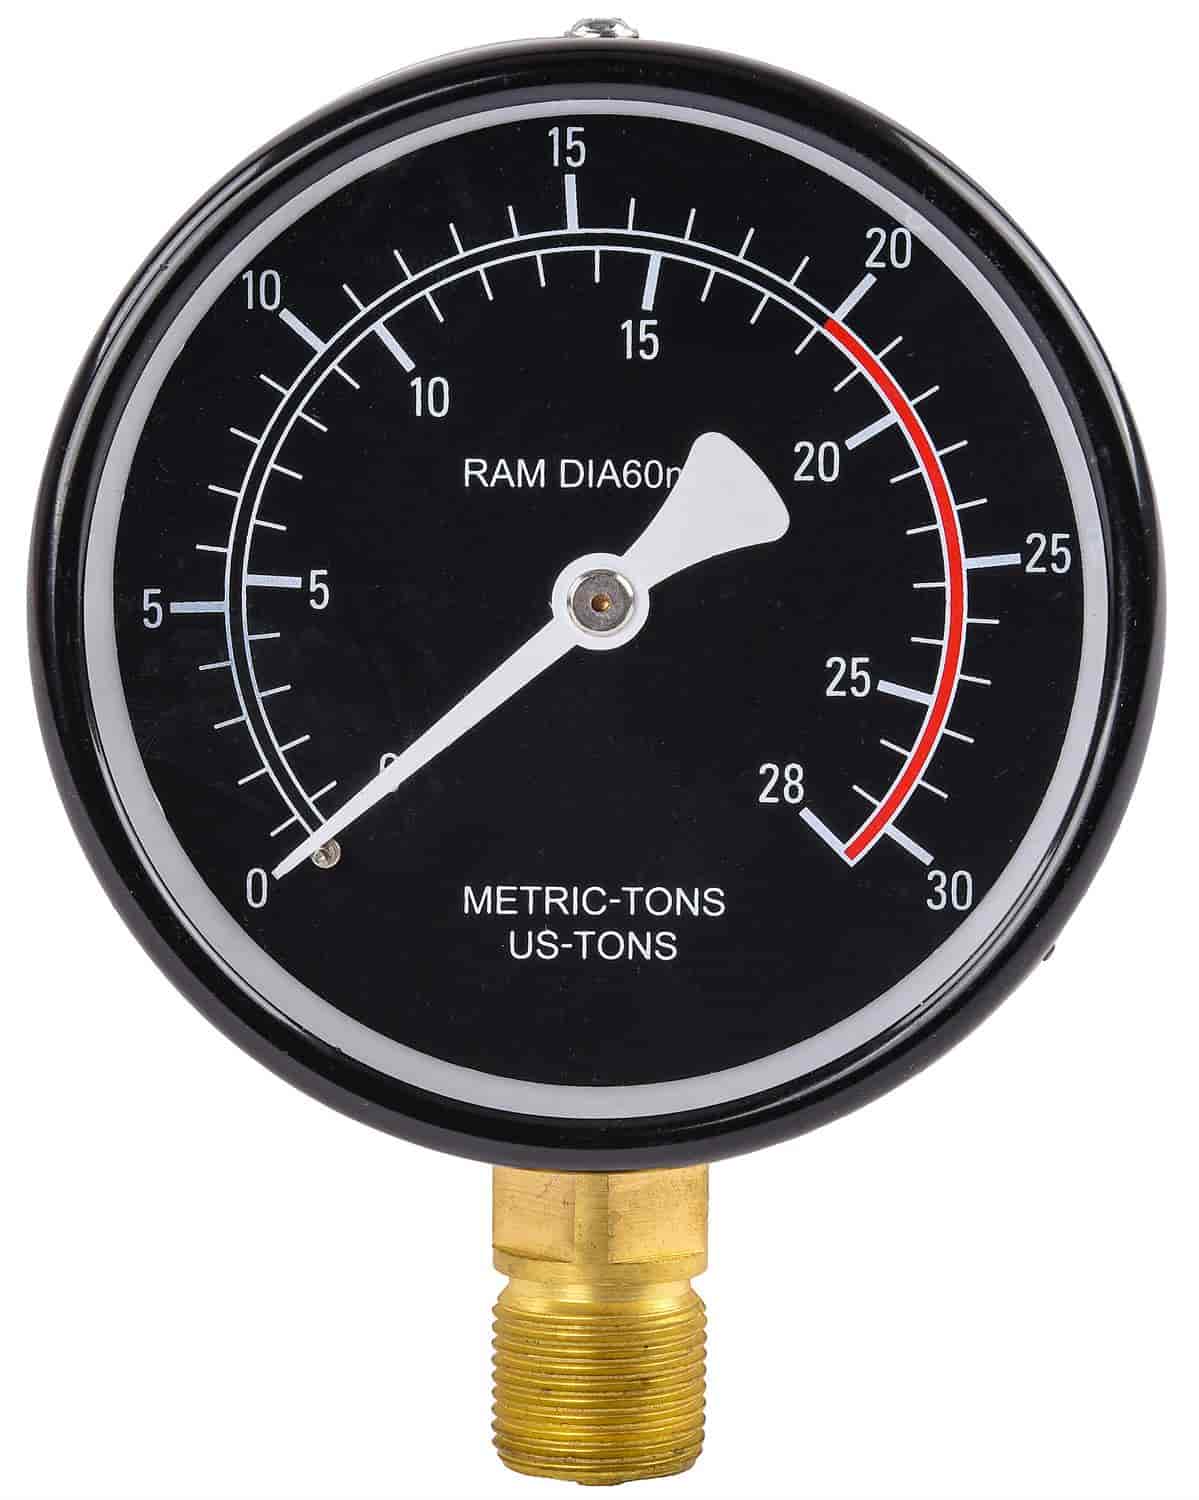 Sinewi Dolke Fantasi JEGS 81638-7: Replacement Pressure Gauge | Fits JEGS 20-Ton Hydraulic Shop  Press 555-81638 | M20-15 Fitting | 3 7/8 in. Diameter | 30 US-Ton/28 Metric- Ton Max Pressure | Black Face with White Needle - JEGS